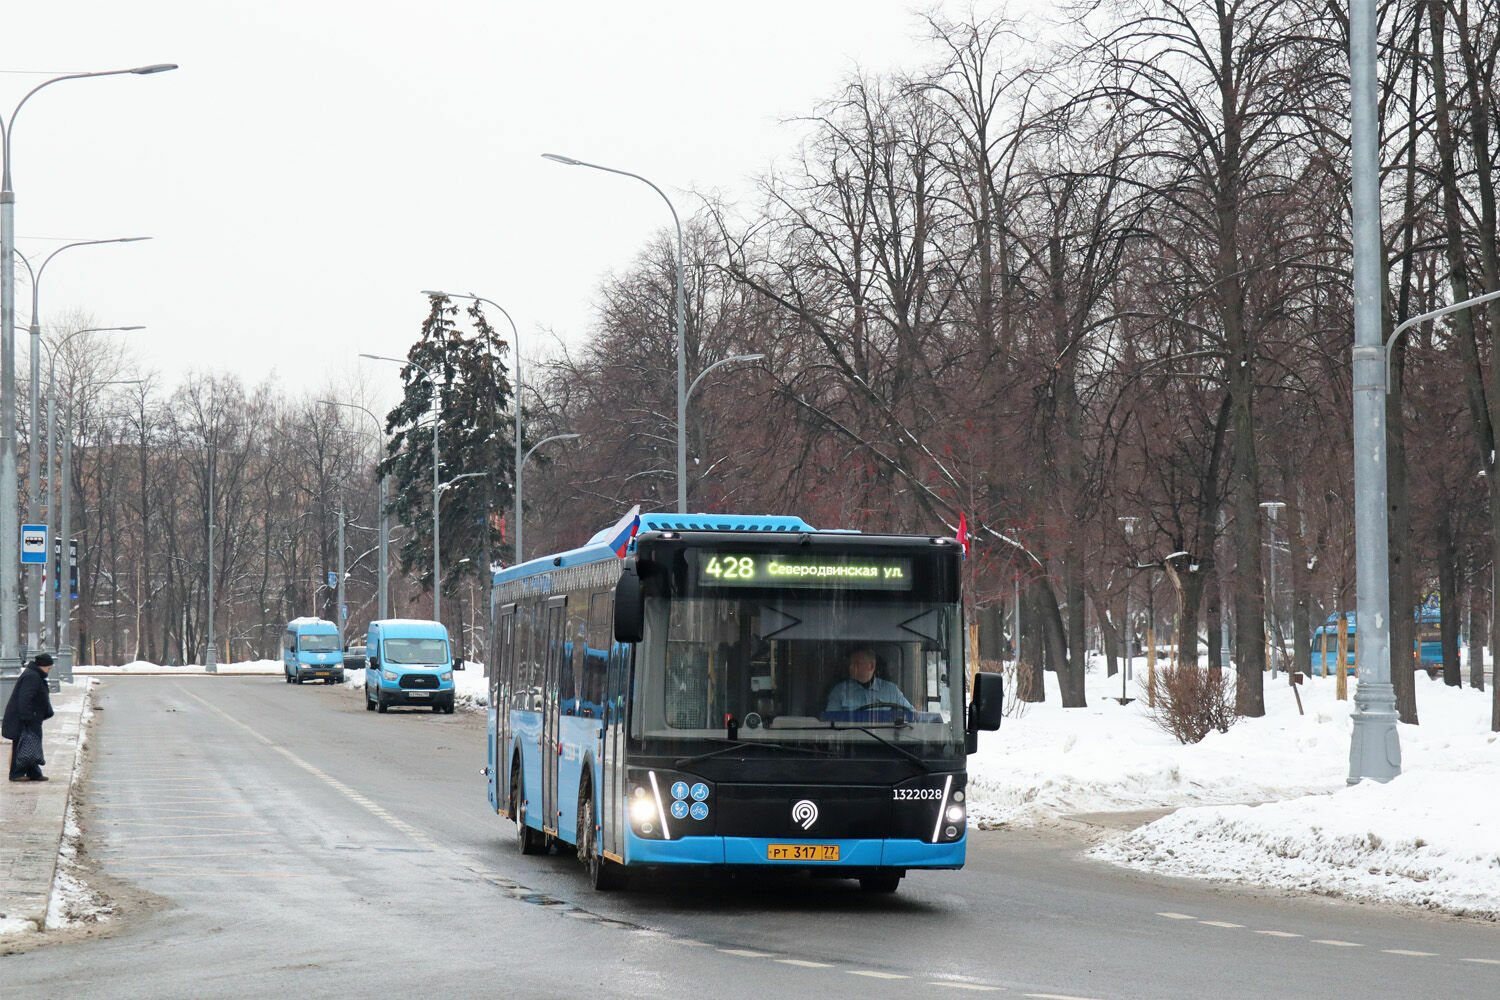 Public transport fares have risen in Moscow